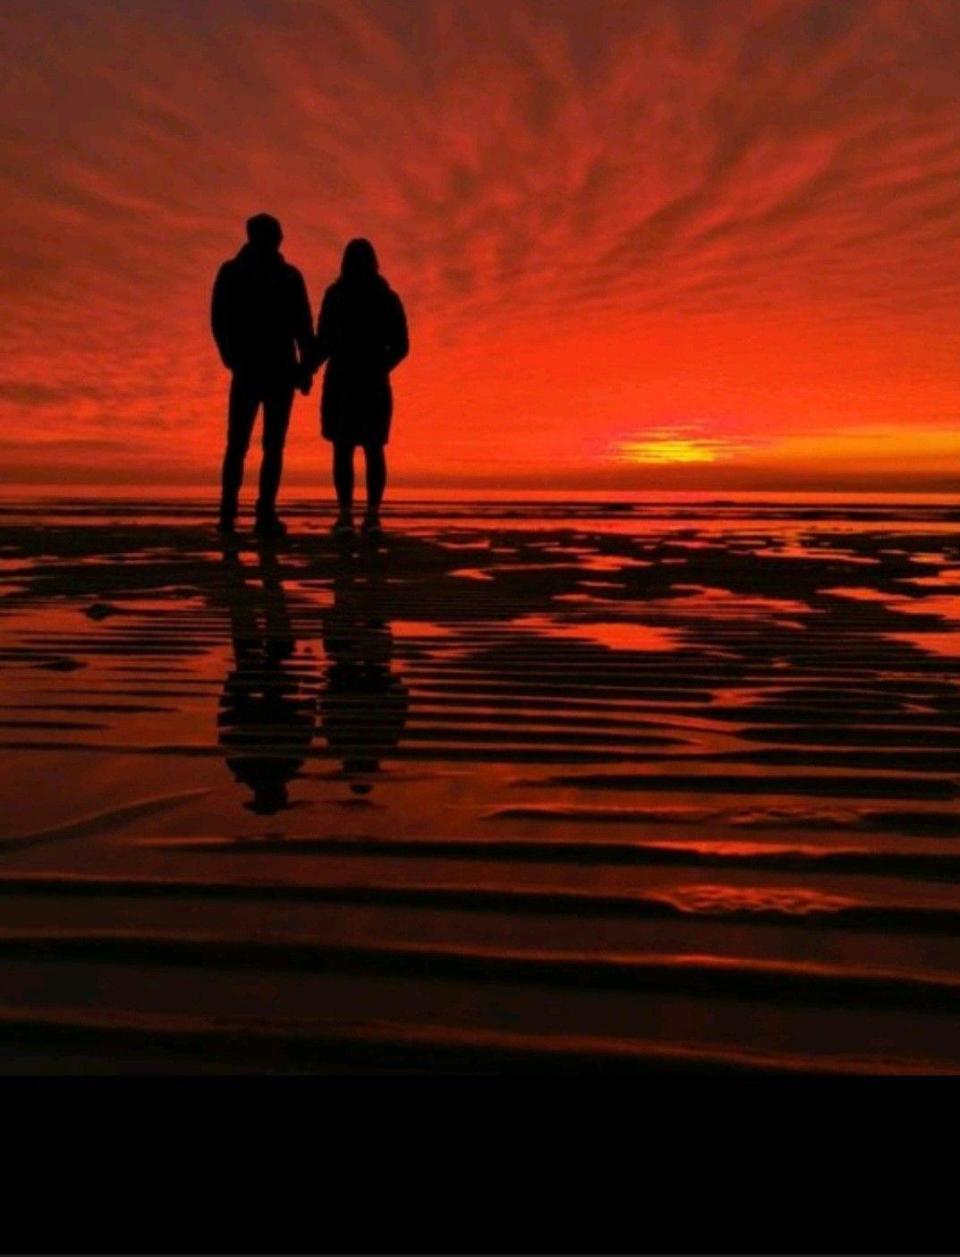 Two people on a beach